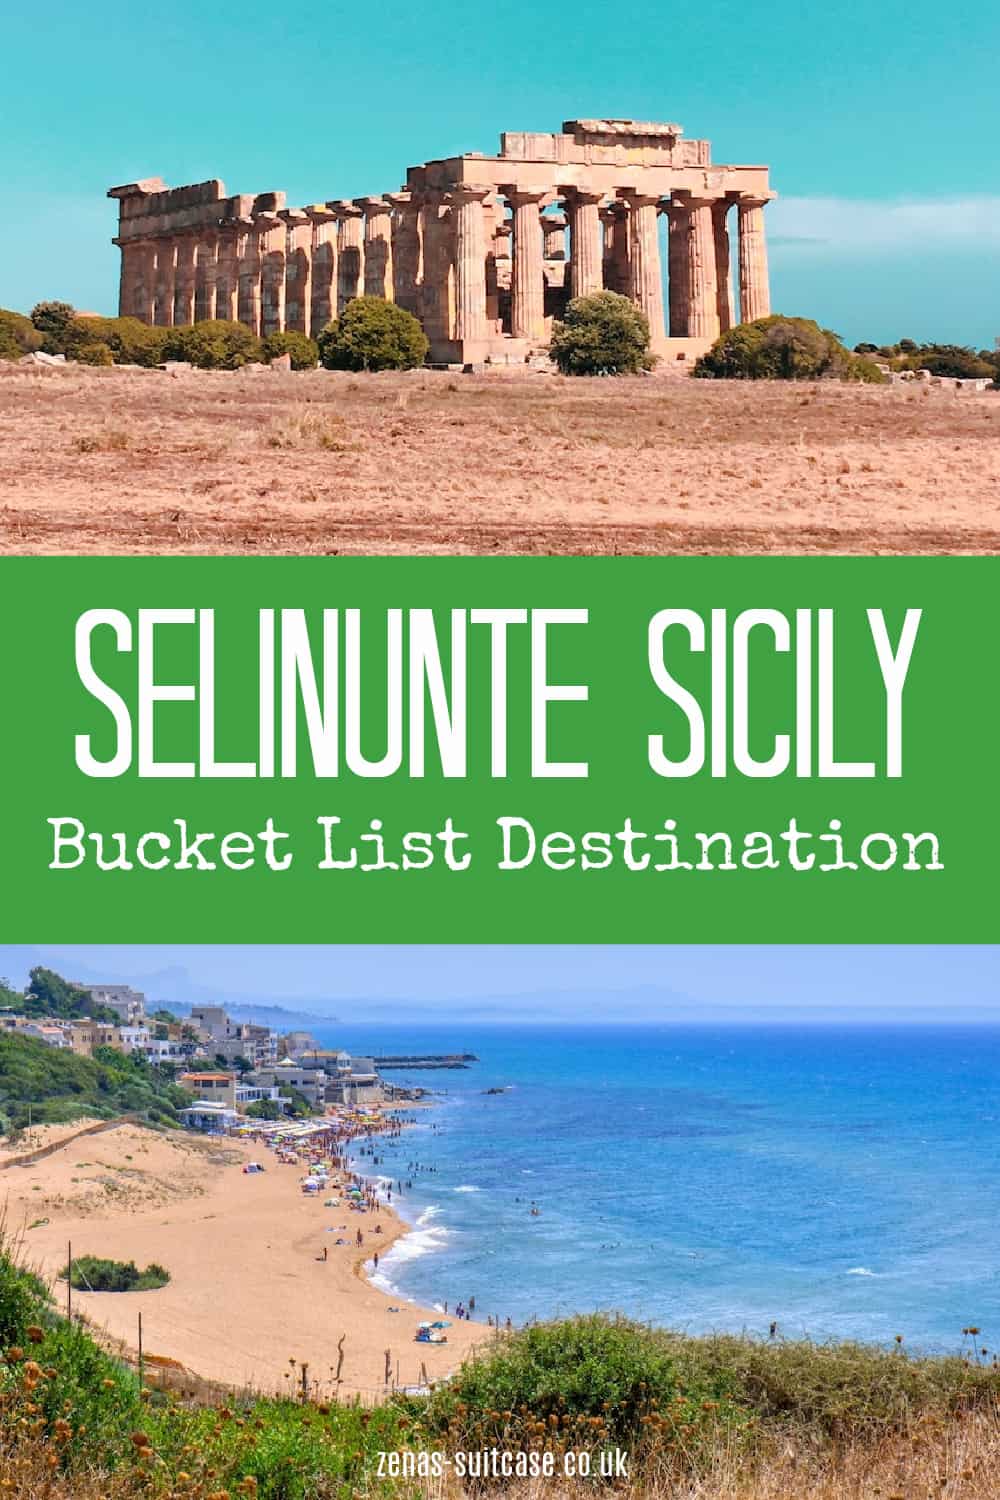 Why Selinunte, Sicily, Needs To Be On Your Bucket List